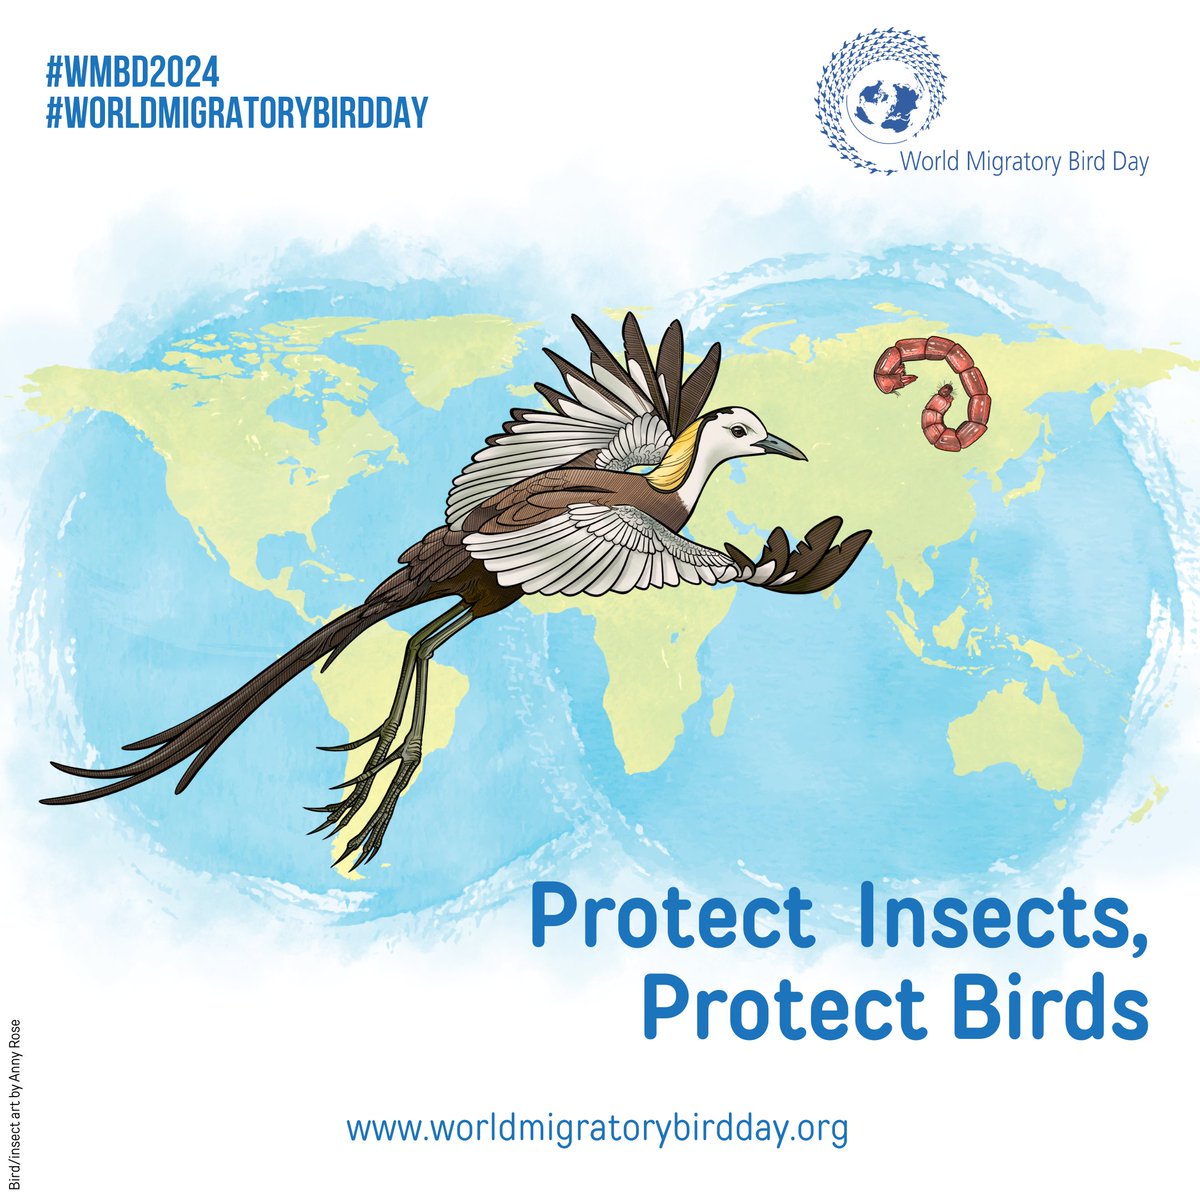 Today is #WorldMigratoryBirdDay ! 

Migratory bird species depend on insects during migration and at other stages of their life cycles when feeding their offspring 
Insects influence the timing, duration, & success of bird migrations. 

#ProtectInsectsProtectBirds
#WMBD2024